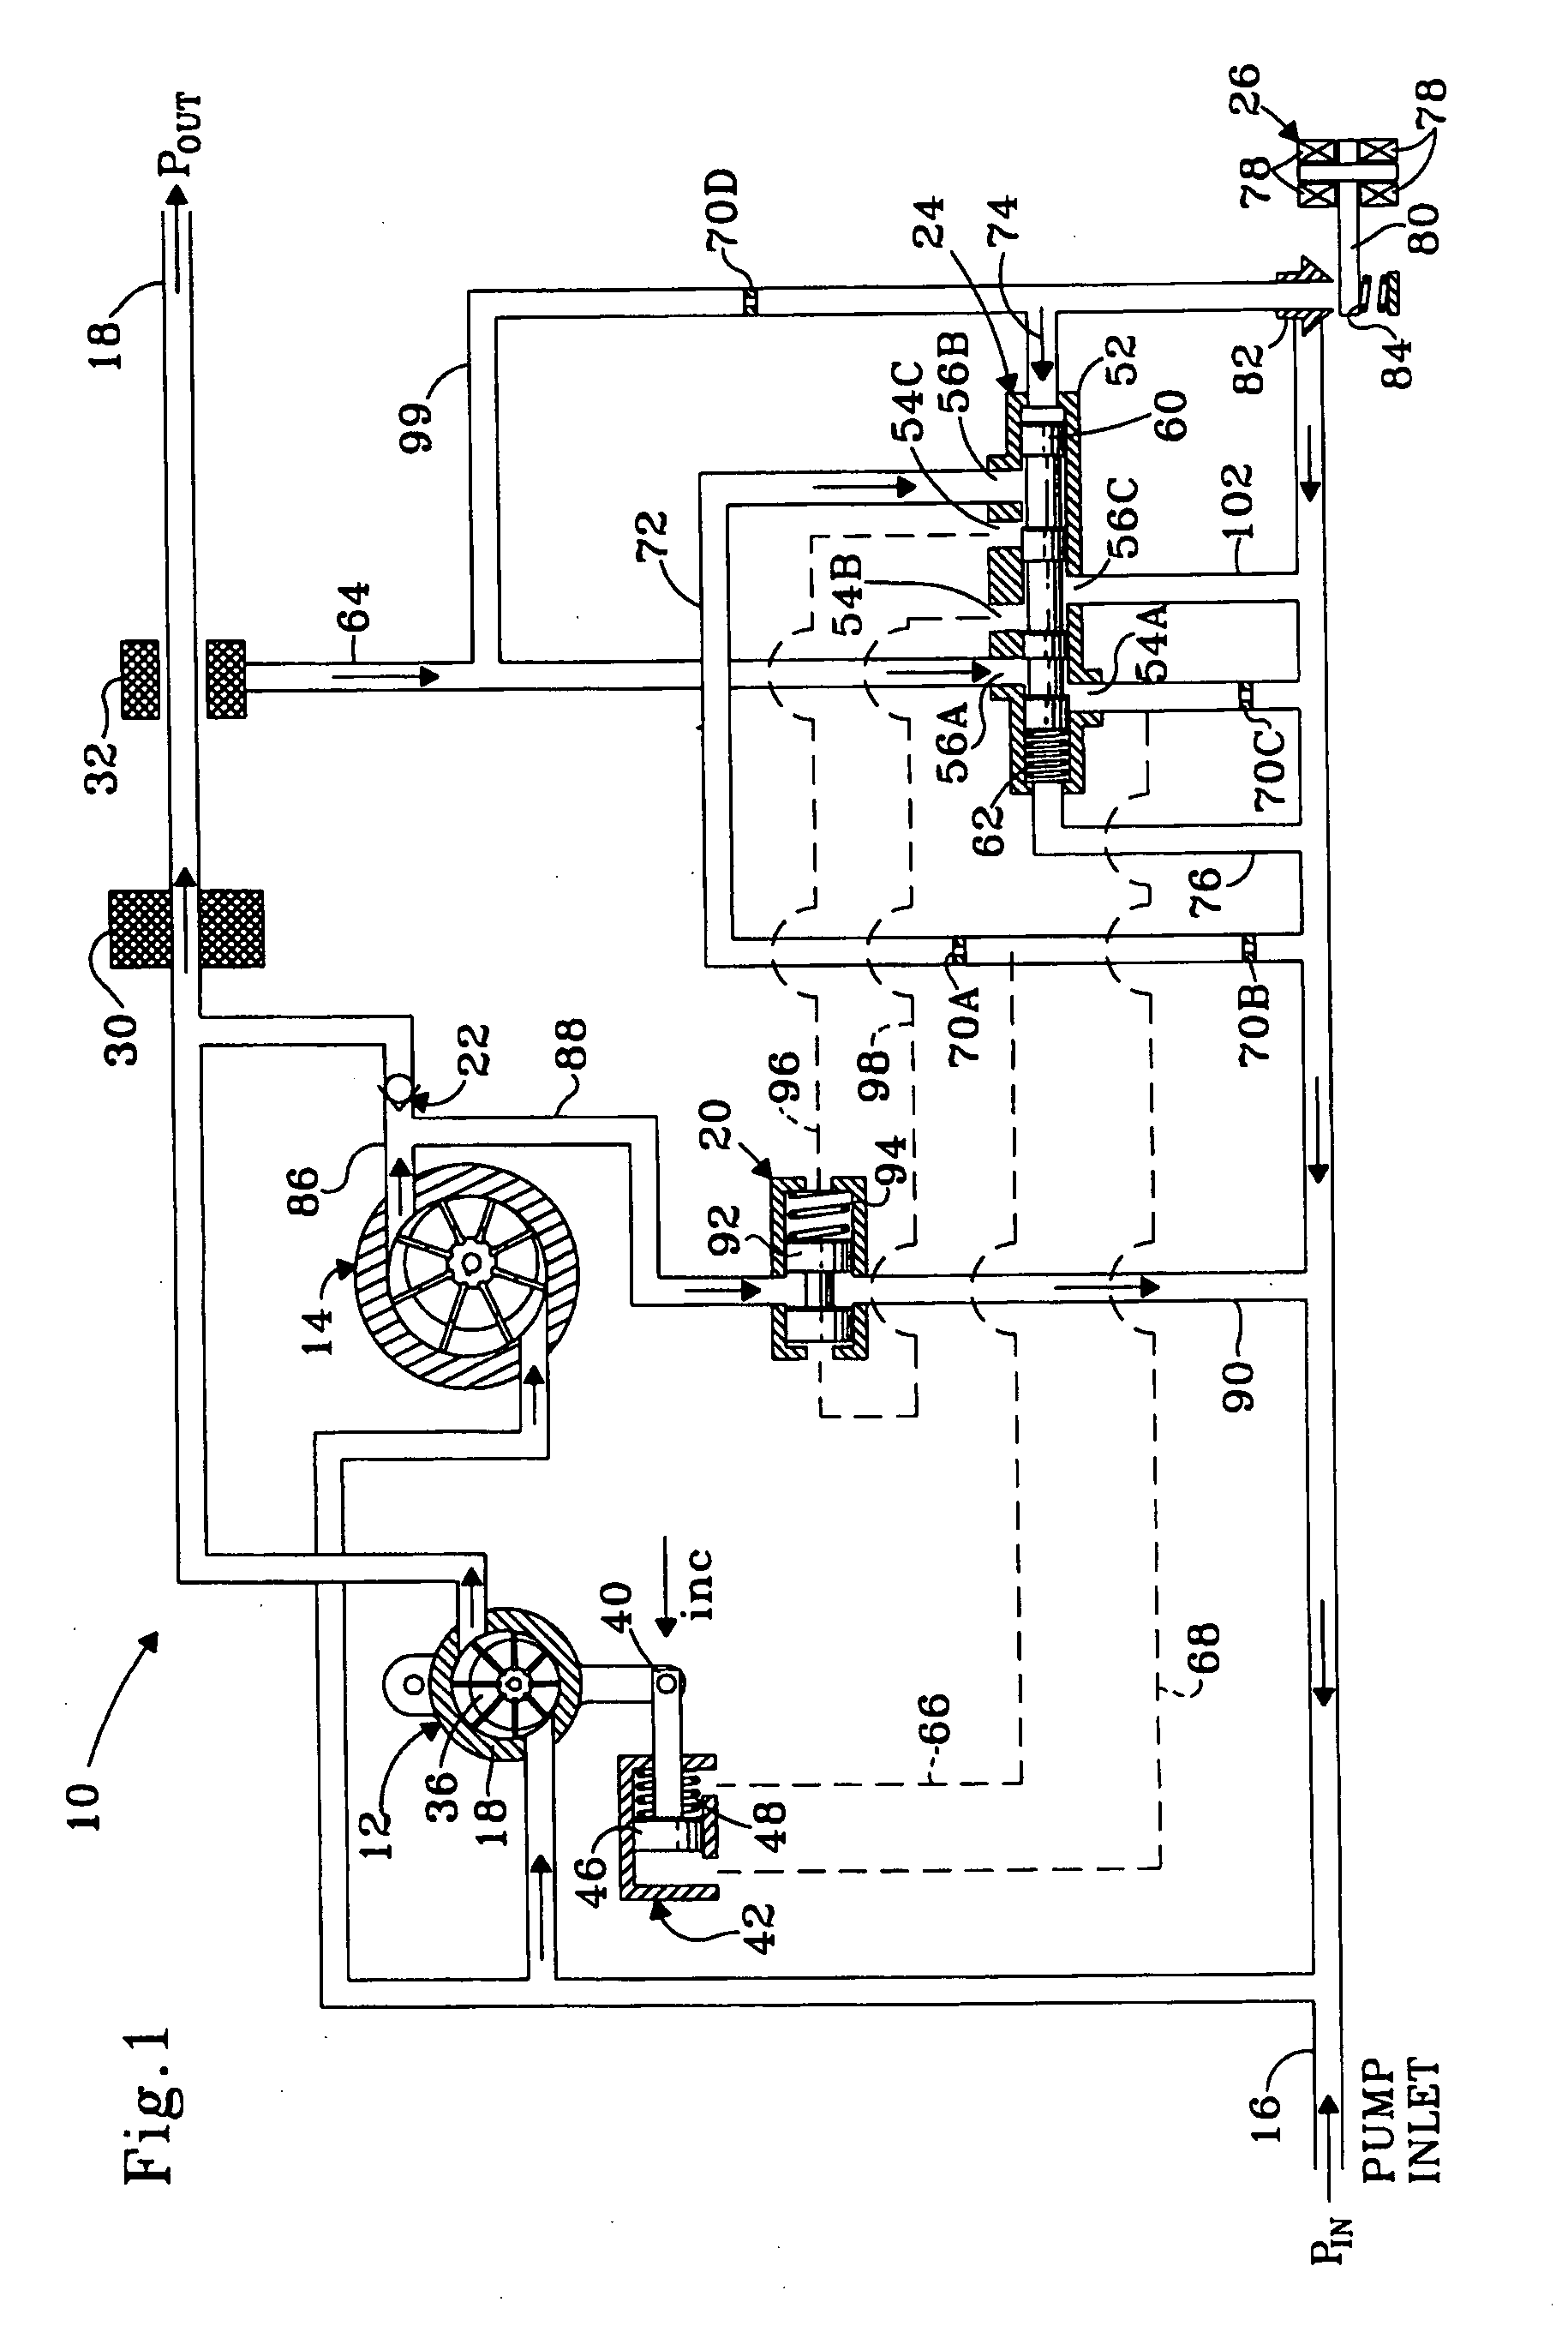 High Efficiency 2-Stage Fuel Pump and Control Scheme for Gas Turbines